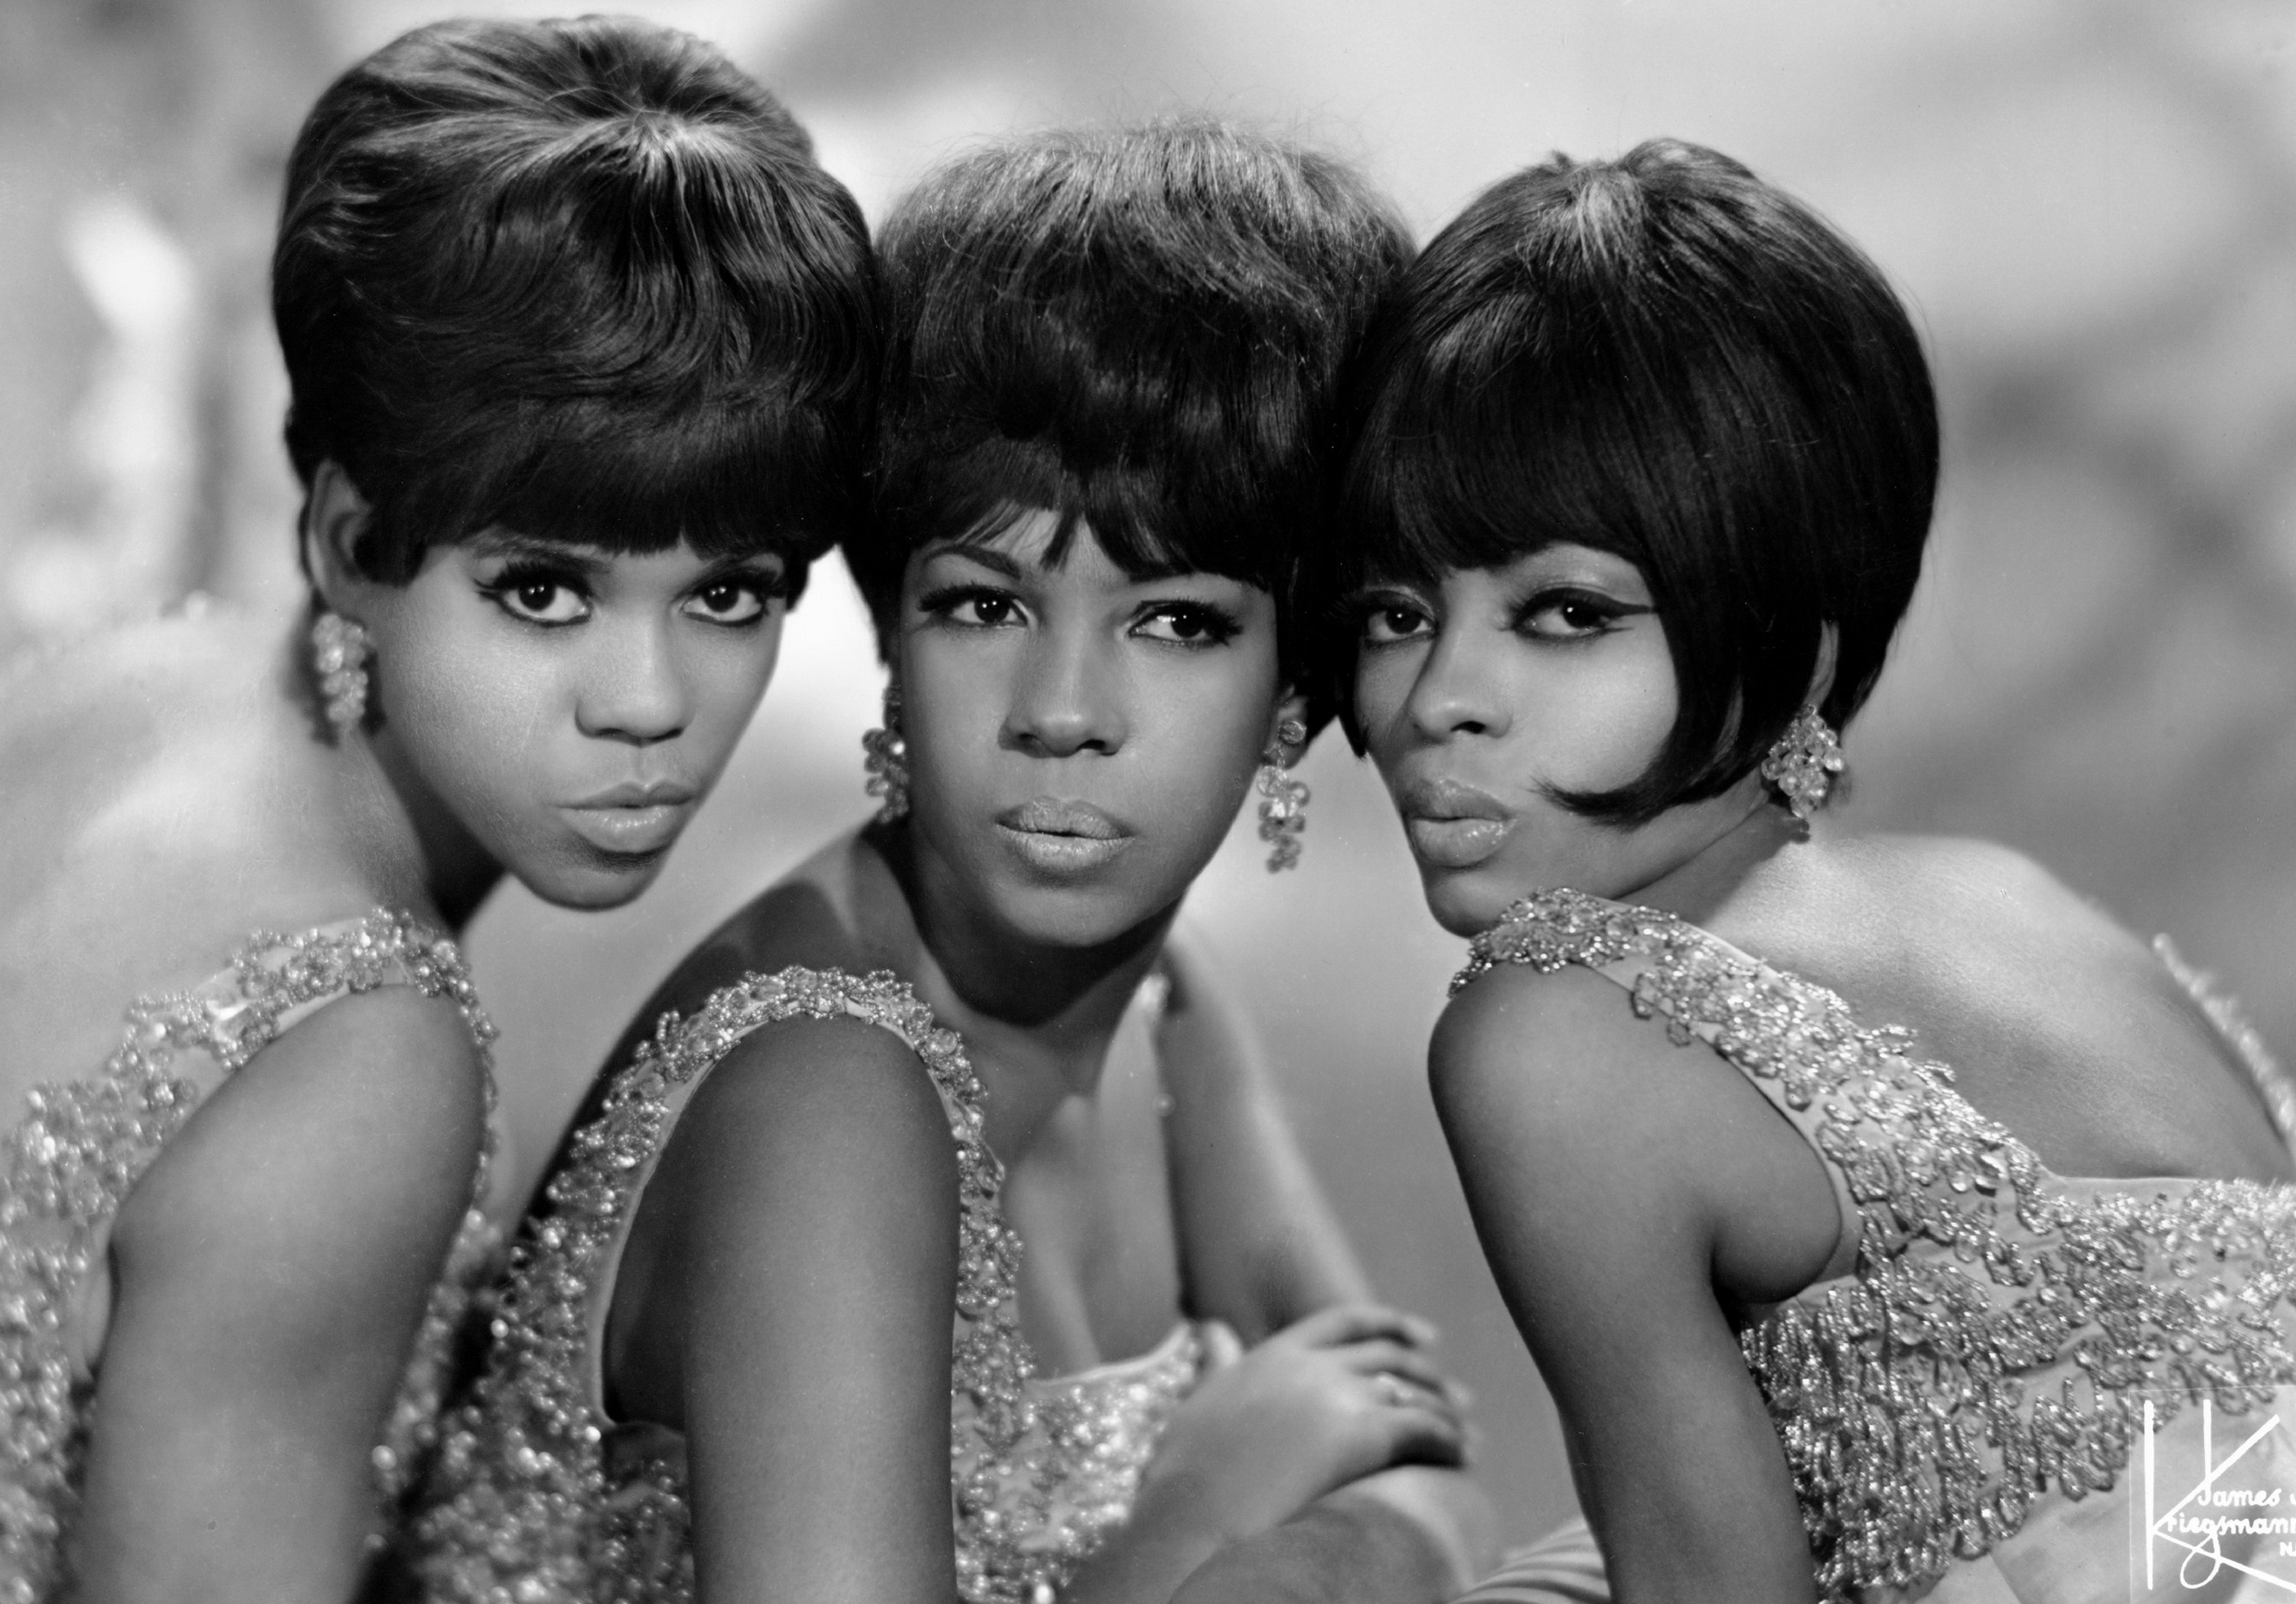 The Supremes wearing earrings